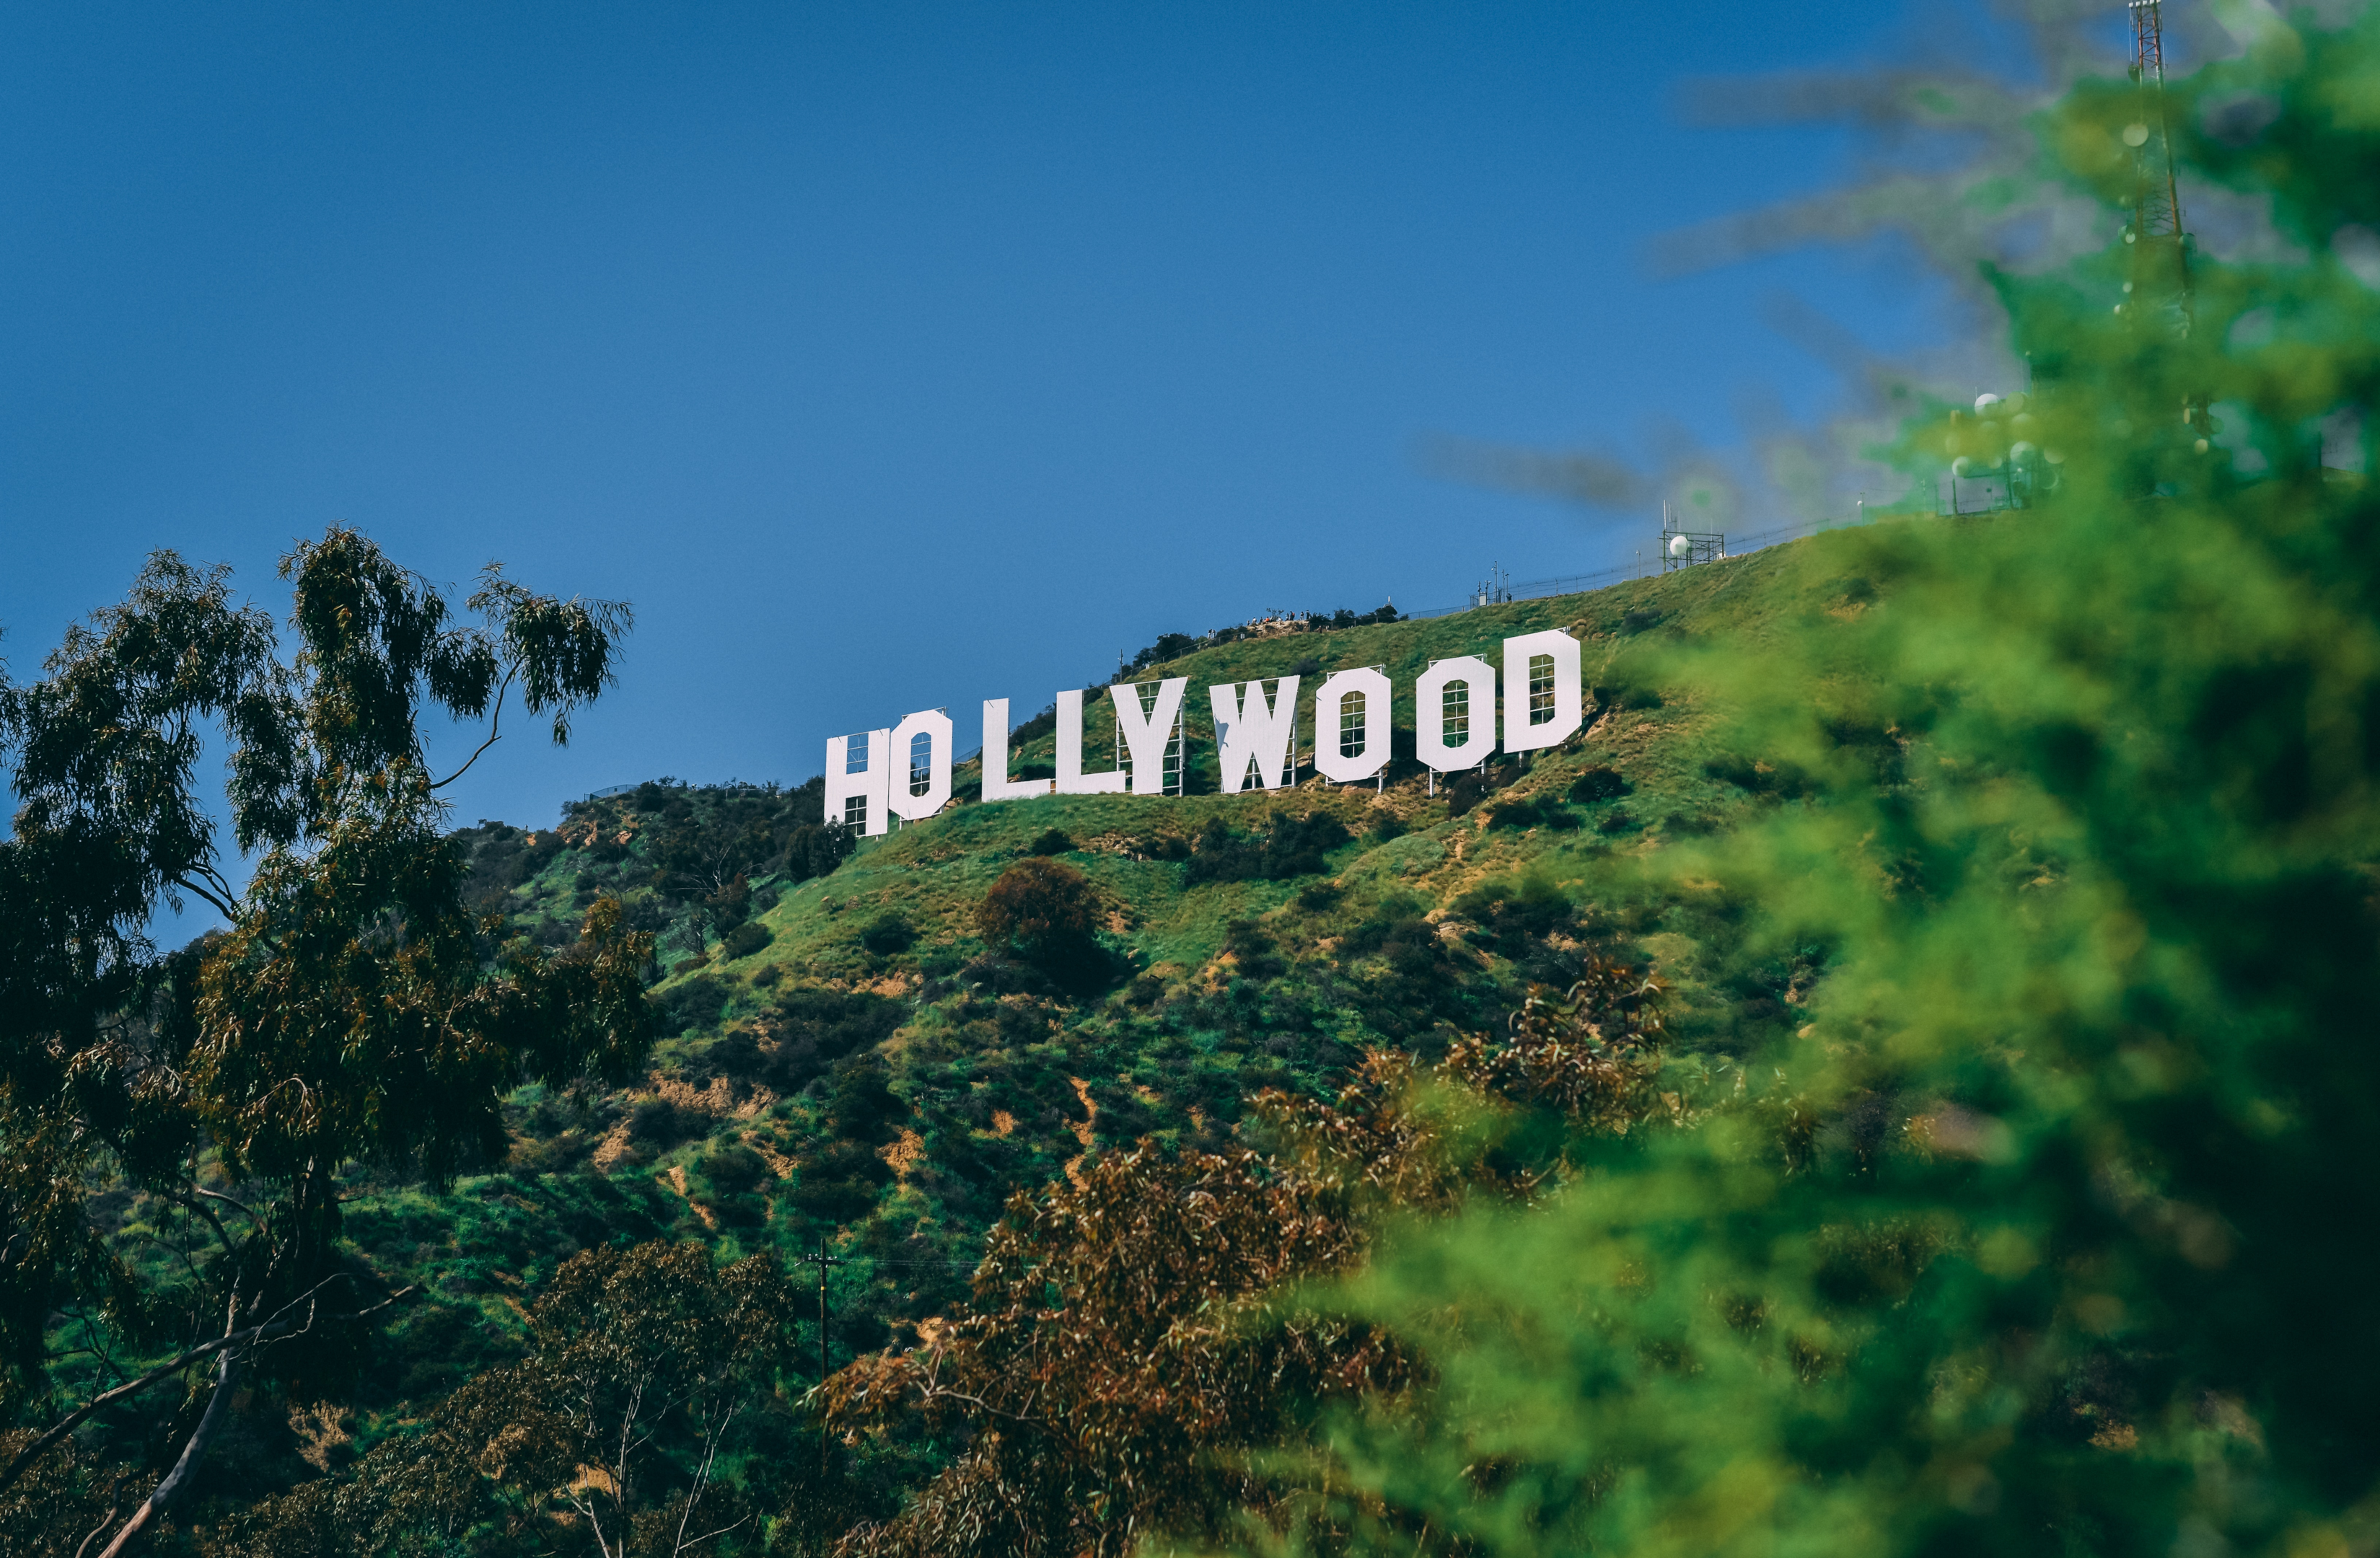 Hollywood Sign in Los Angeles, California. Photo by Photo by Paul Deetman